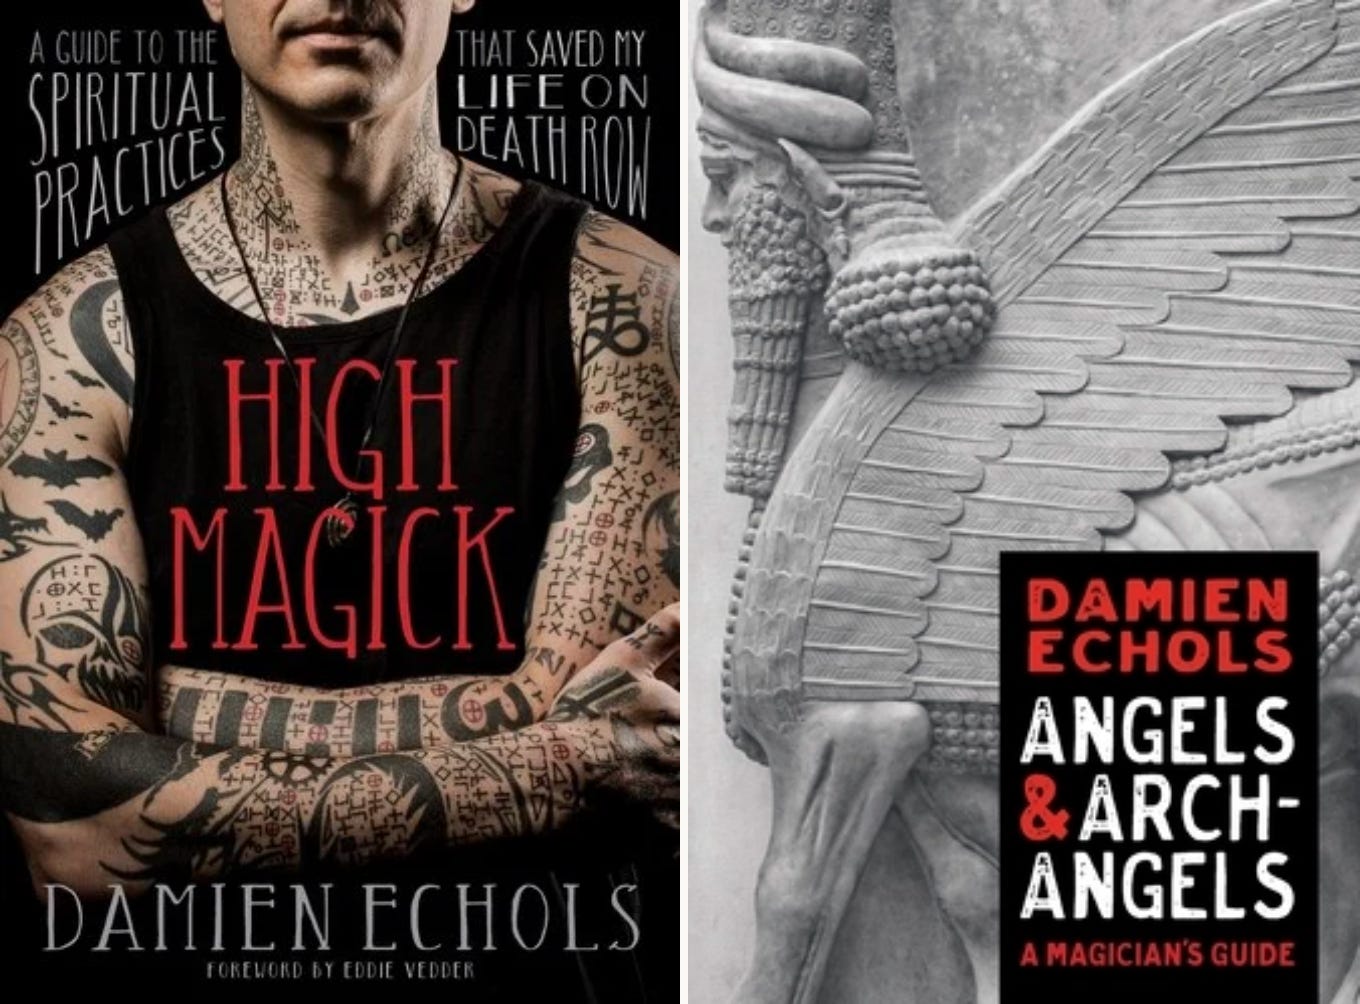 High Magick and Angels & Archangels by Damien Echols